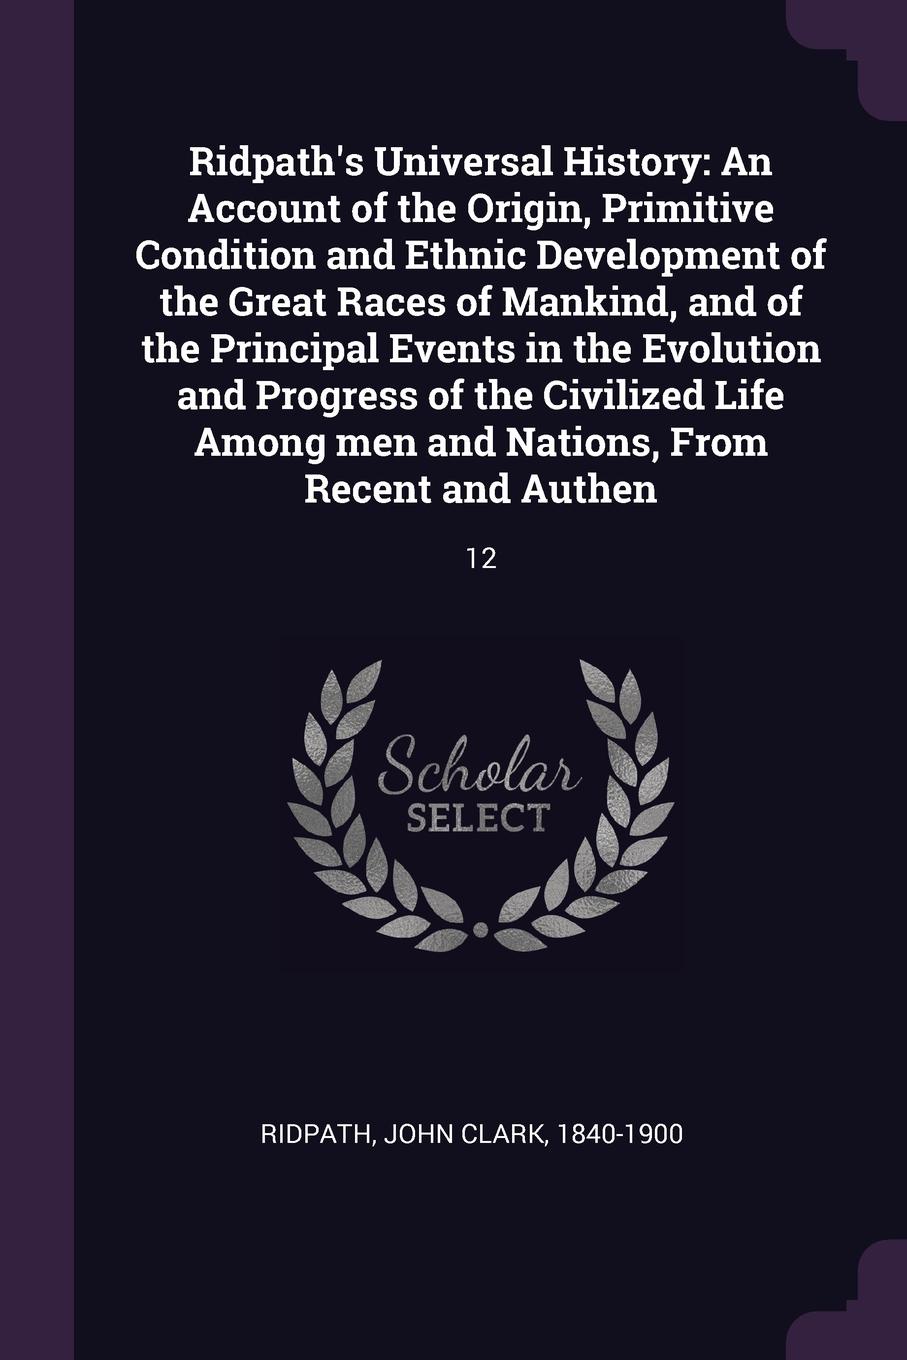 Ridpath`s Universal History. An Account of the Origin, Primitive Condition and Ethnic Development of the Great Races of Mankind, and of the Principal Events in the Evolution and Progress of the Civilized Life Among men and Nations, From Recent and...